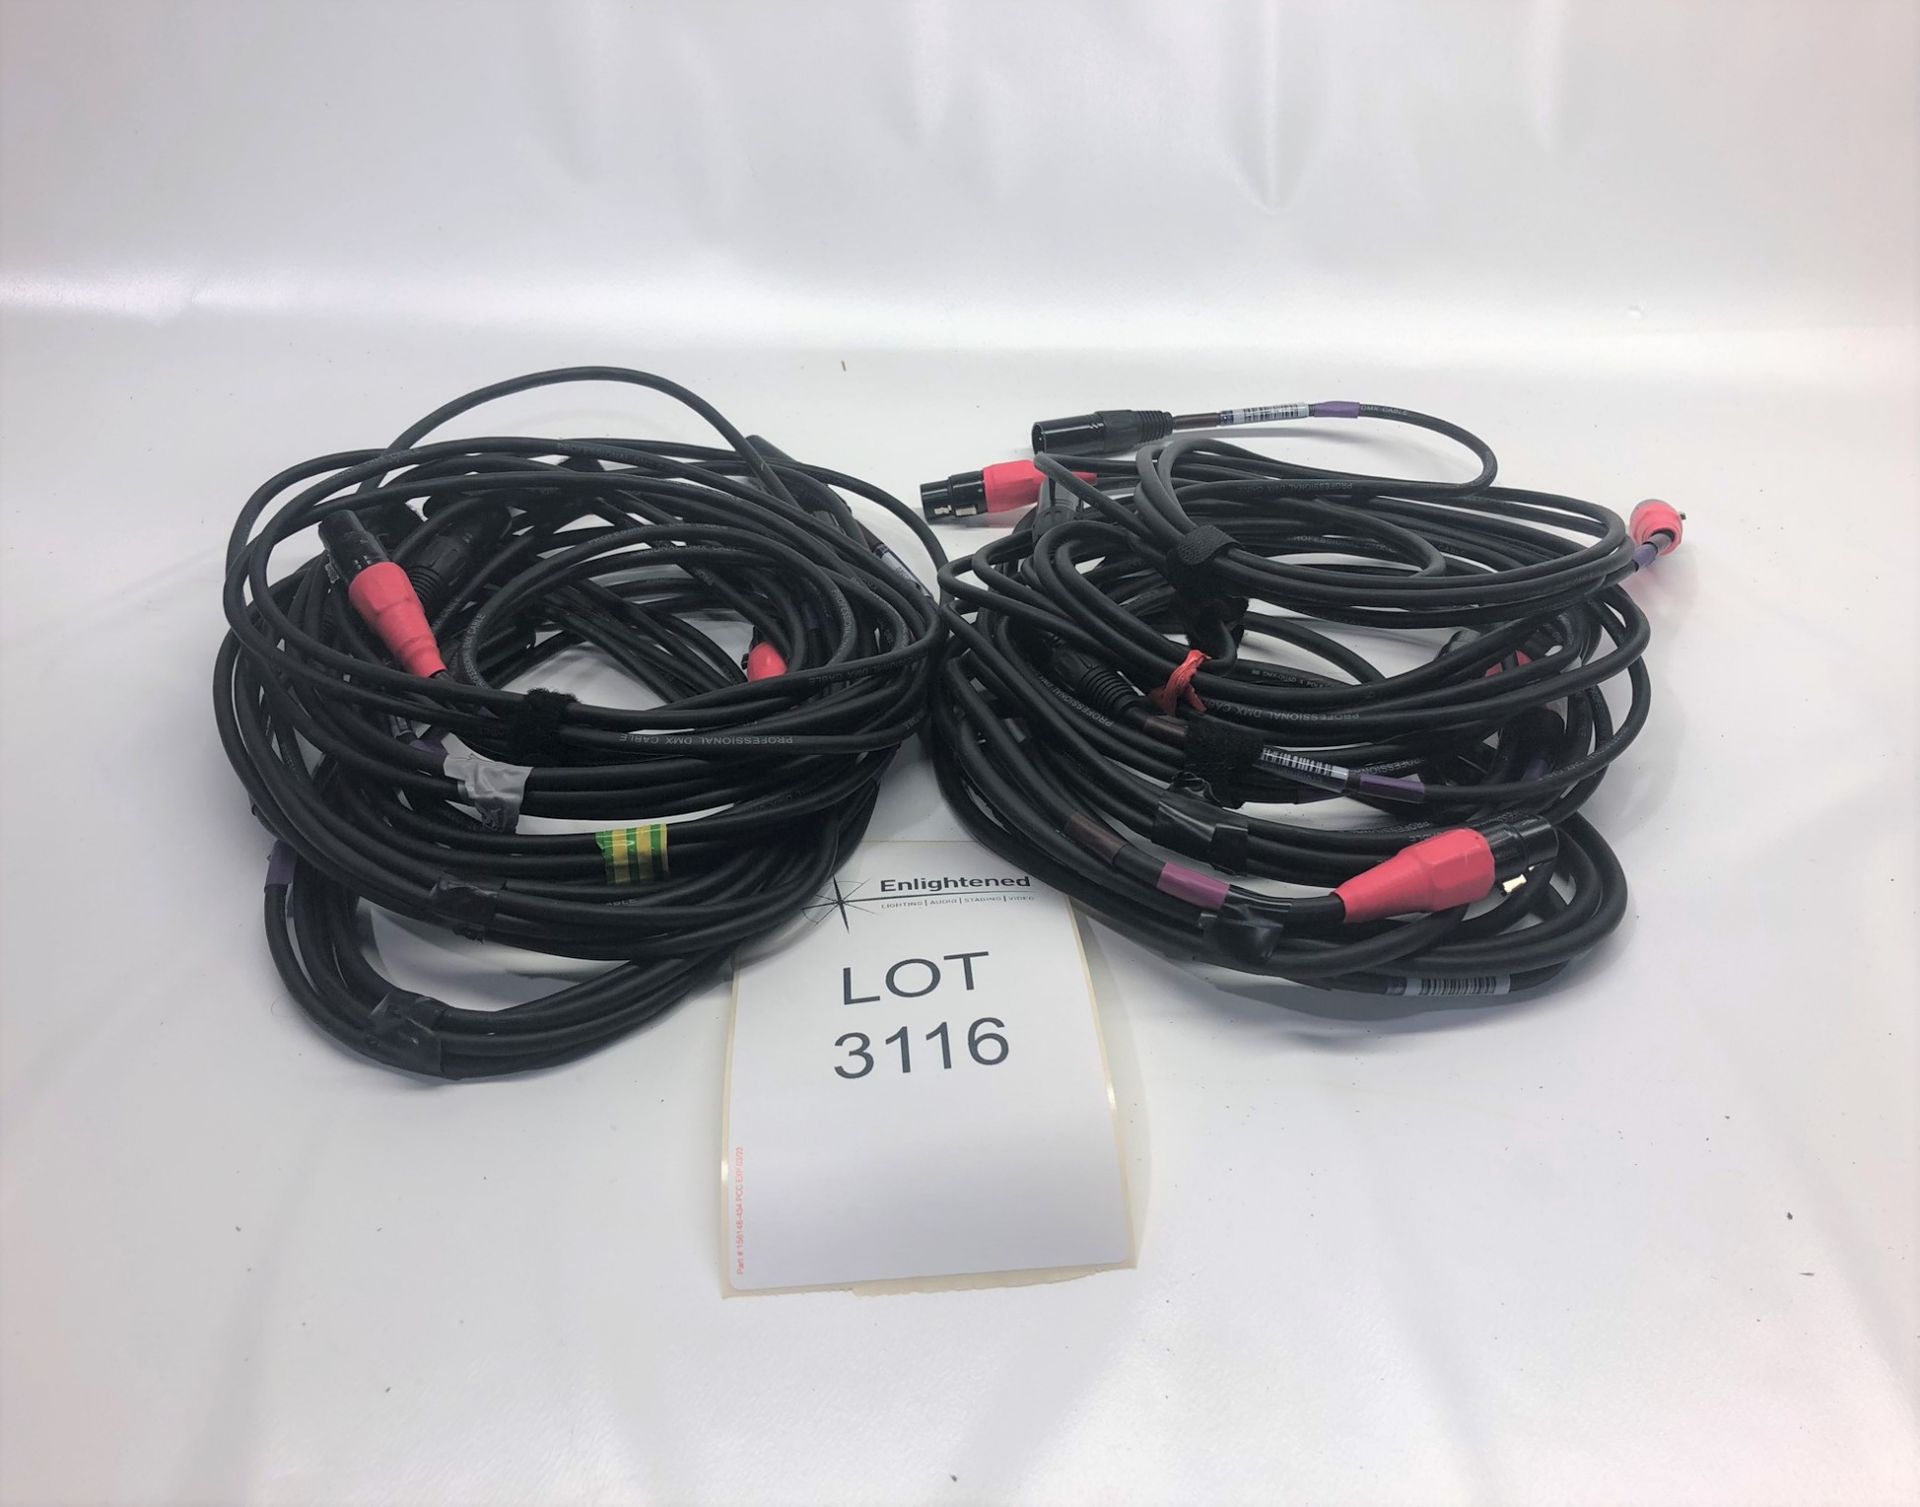 10x 3m DMX cable (not neutrik) Condition: Ex-Hire Lots located in Bristol for collection. Delivery